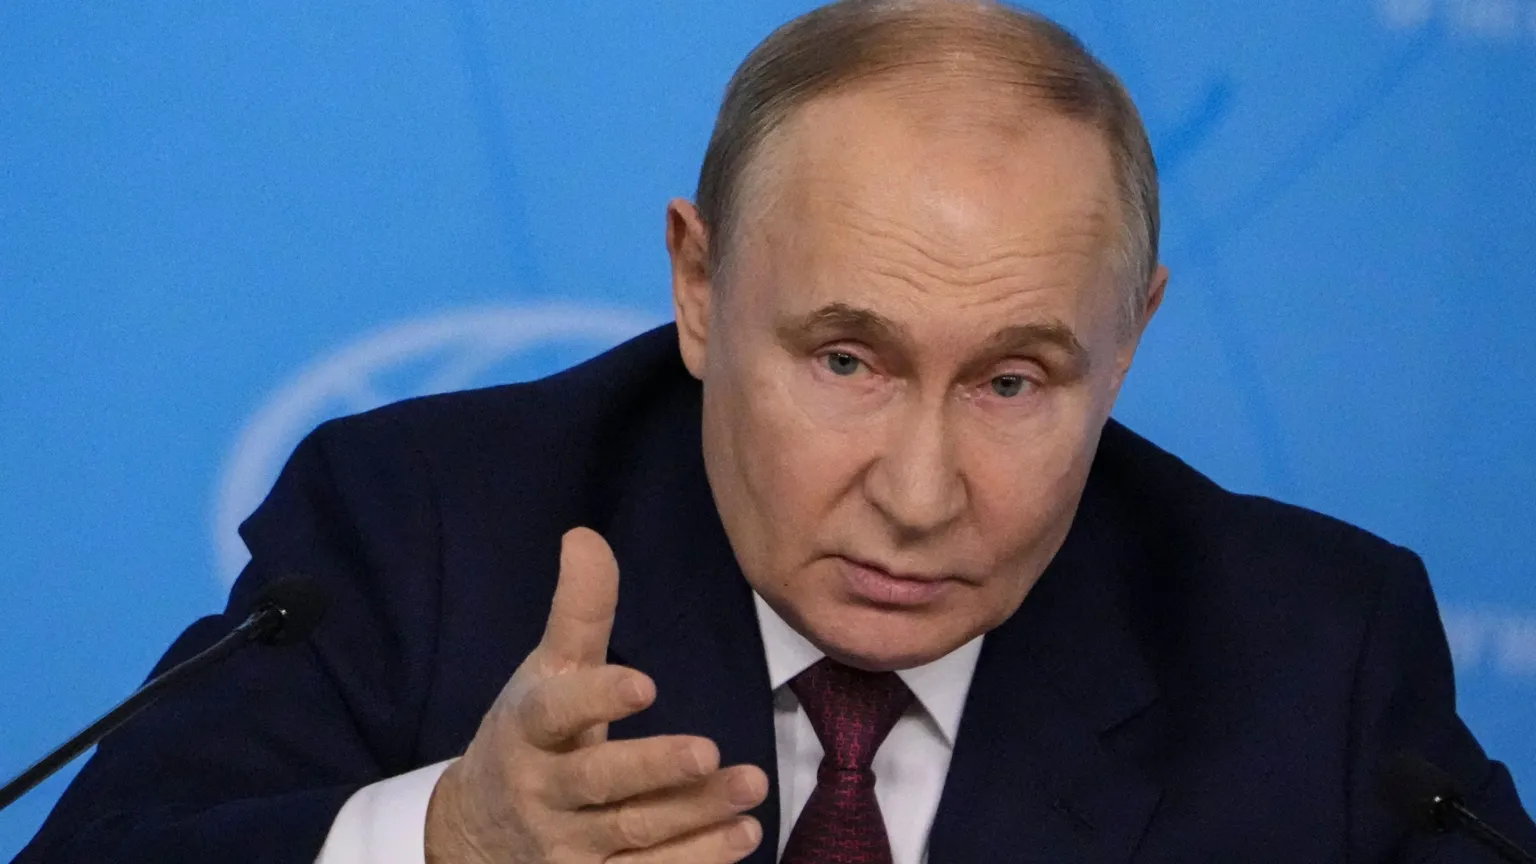 Putin laysss out demands for peace